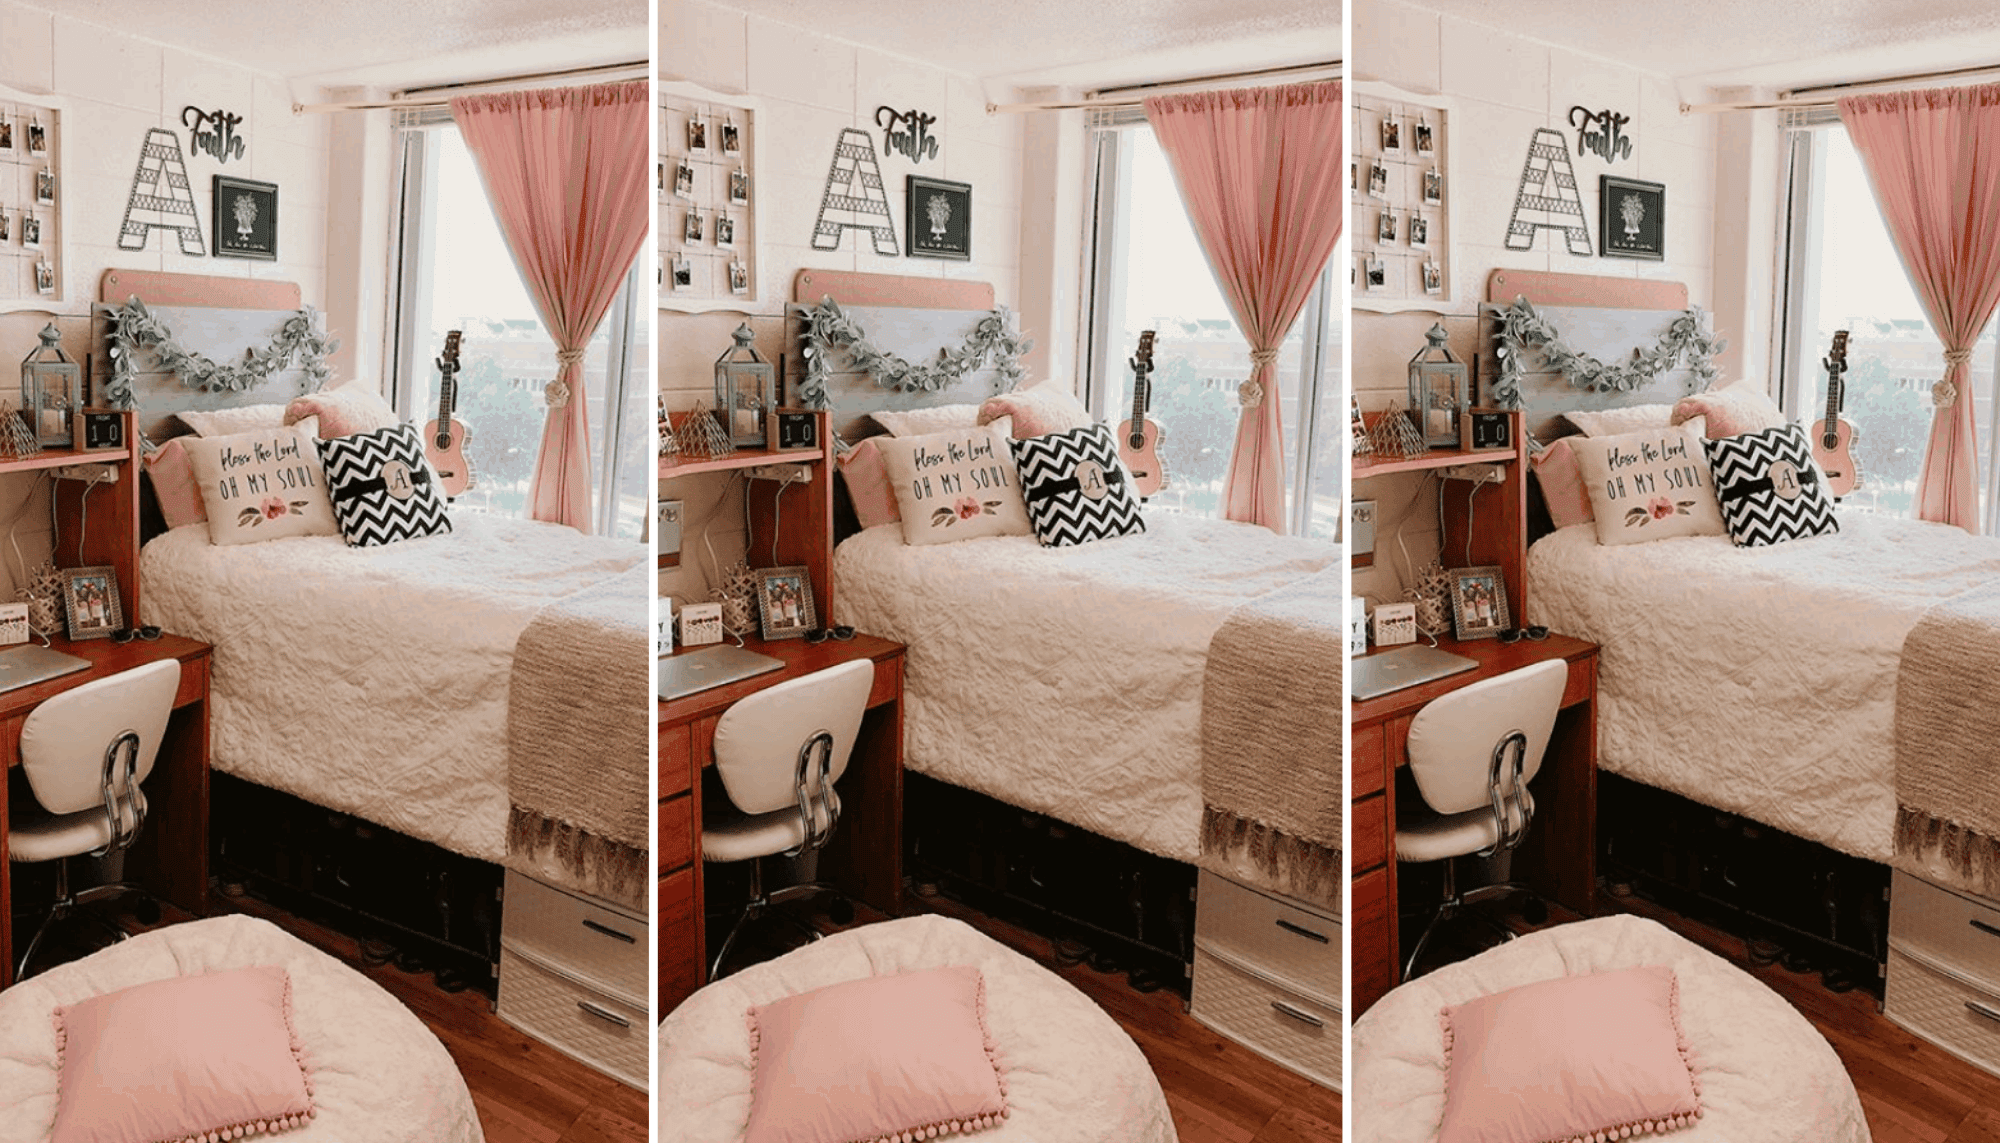 32 Dorm Hacks You Need To Know As A College Freshman By Sophia Lee